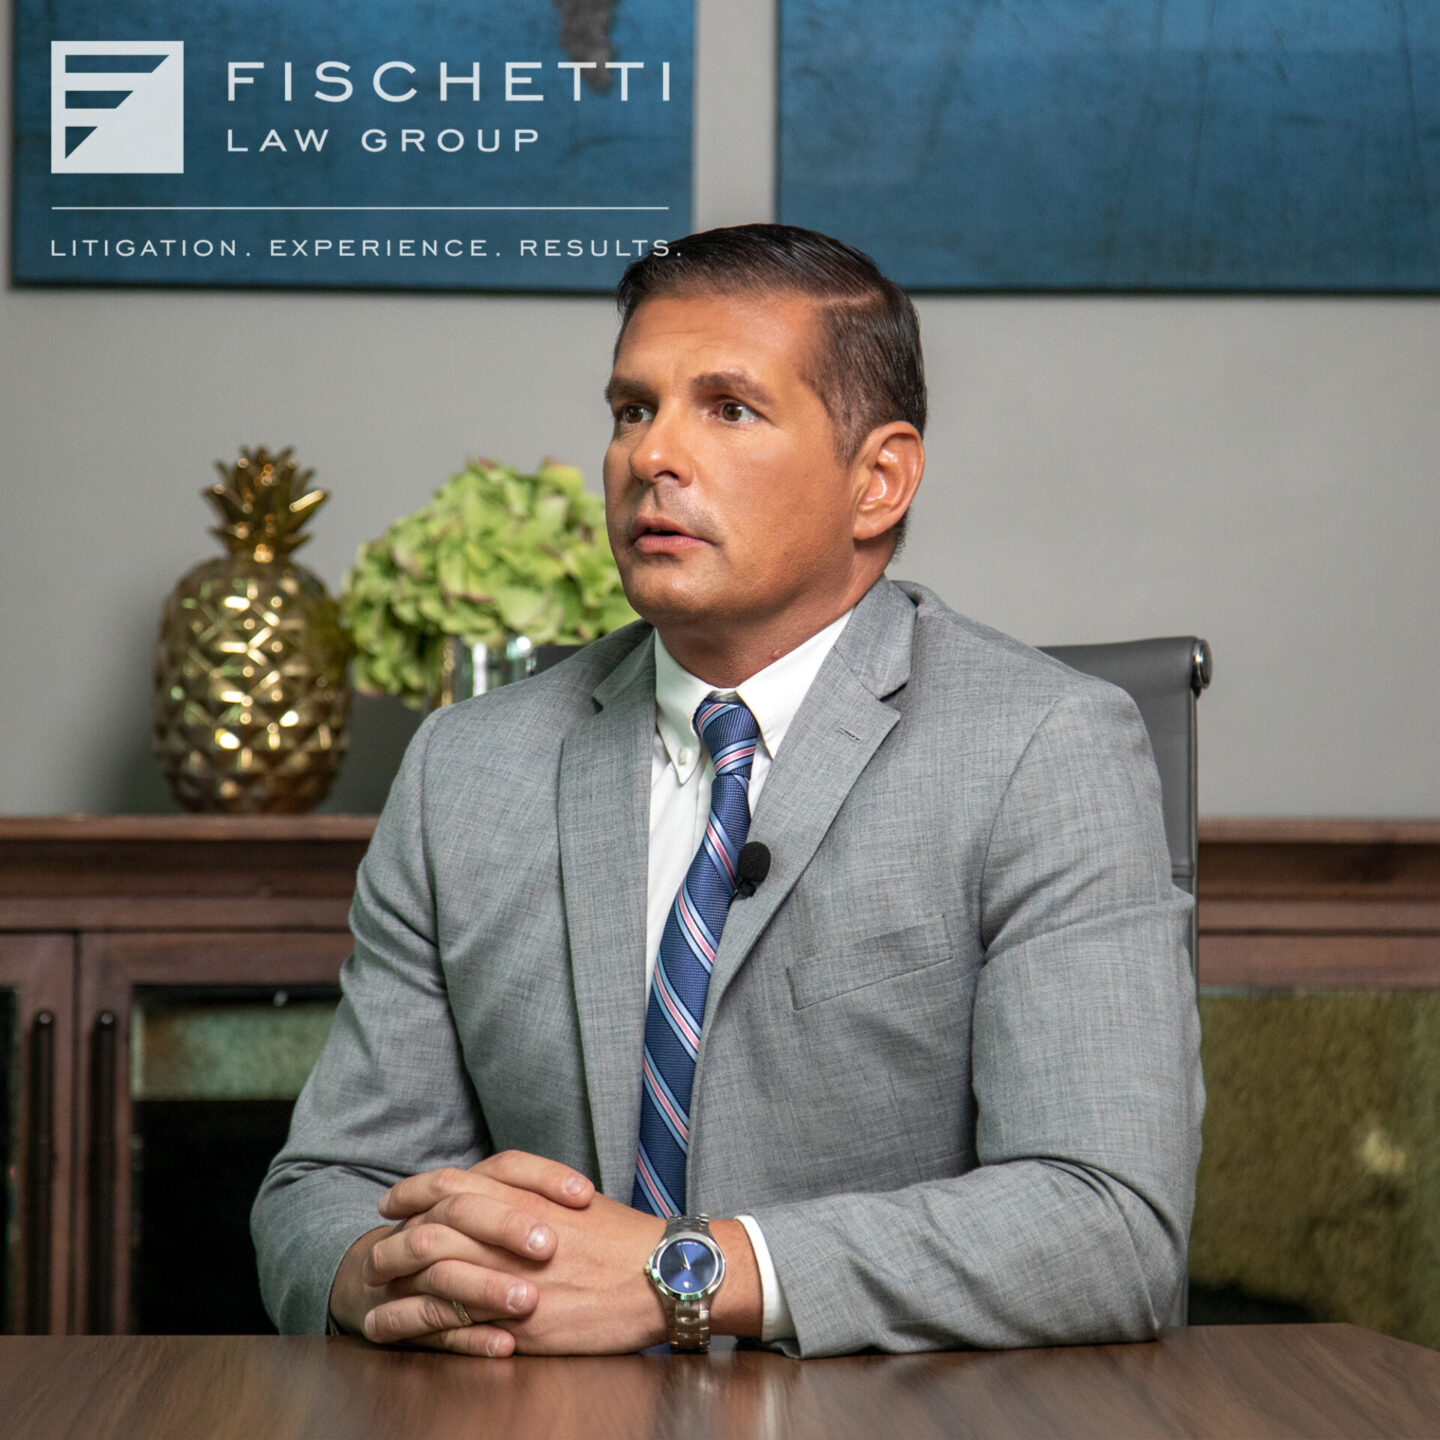 Fischetti law group pip collections - pip - collections lawyer miami